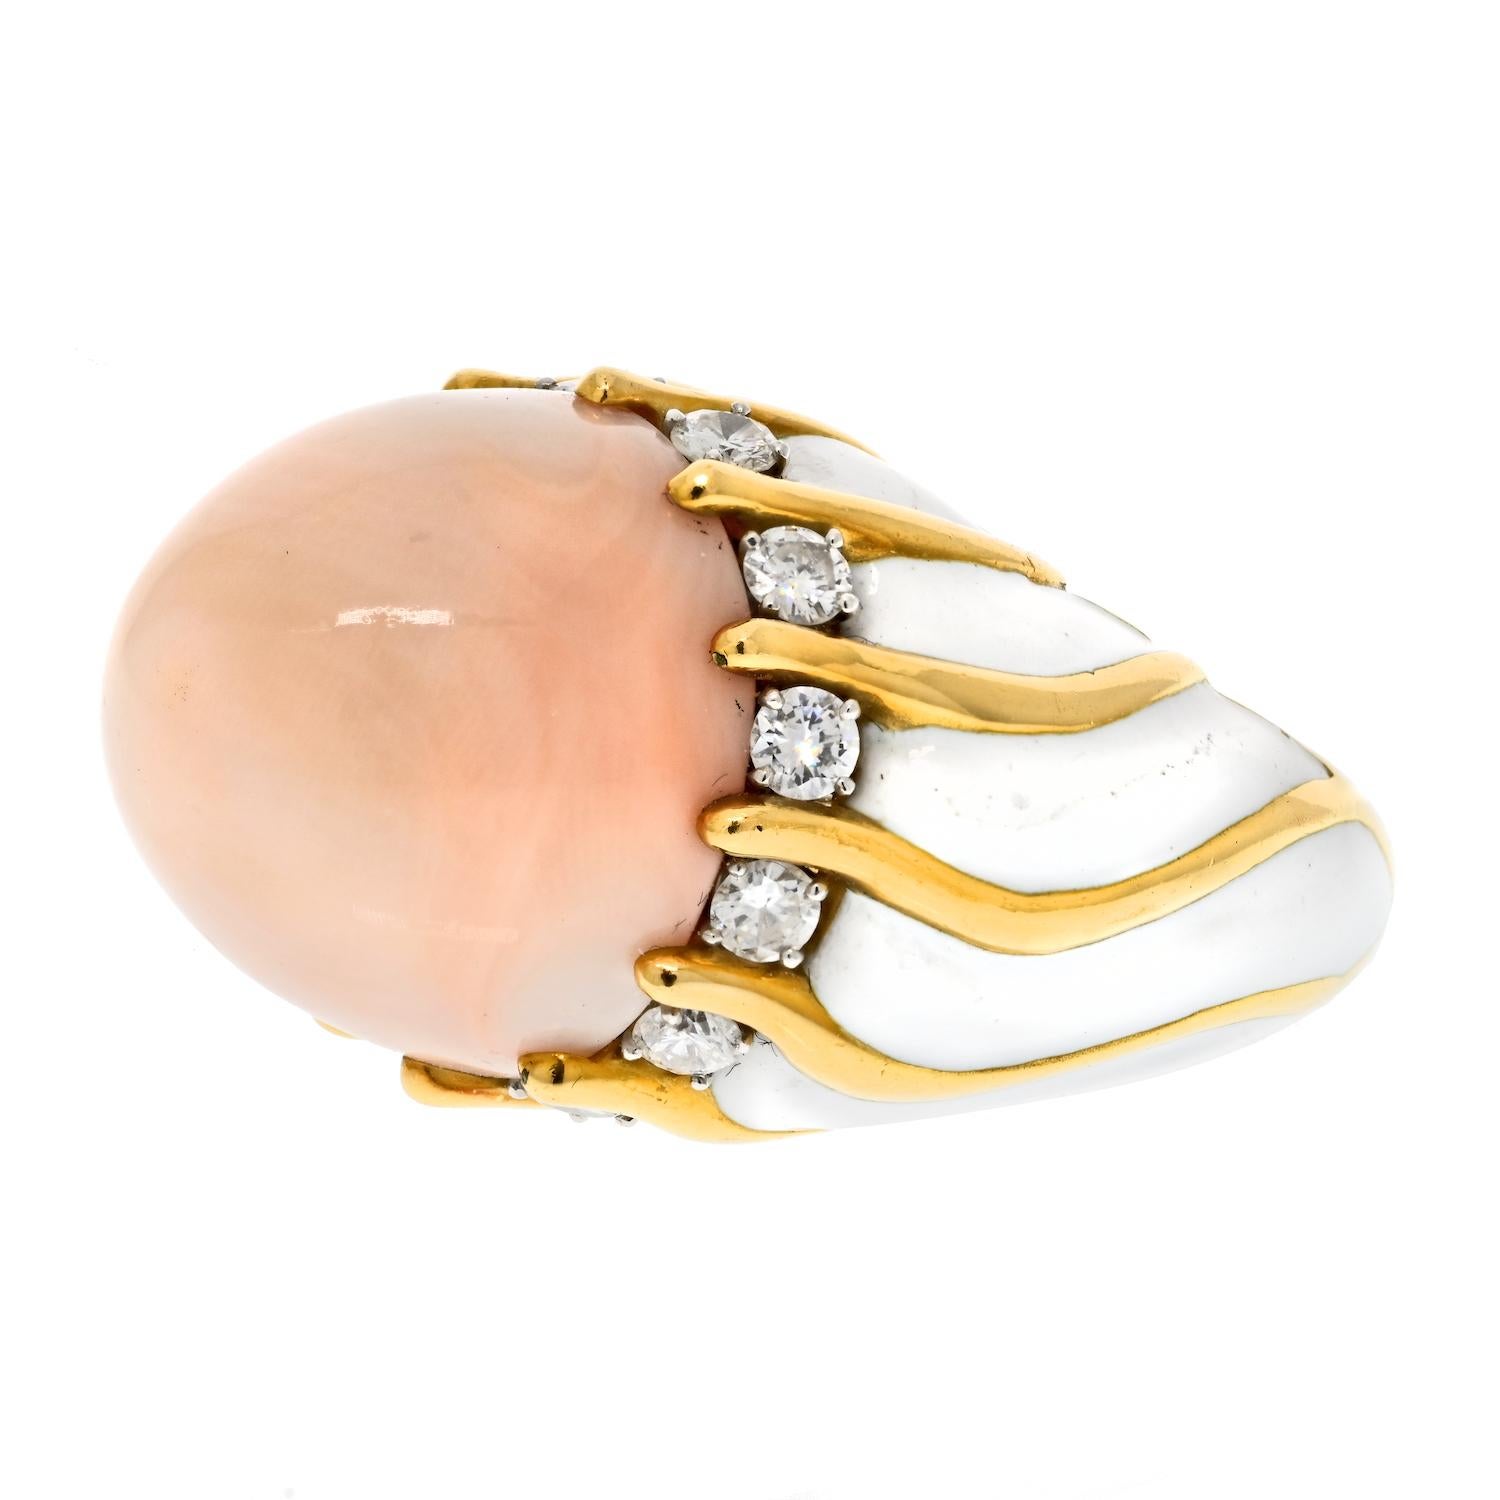 The David Webb 18k yellow gold and white enamel vintage cocktail ring is a stunning piece of jewelry that features a large angel skin coral cabochon cut in the middle, which is further embellished with sparkling white round cut diamonds. This fine